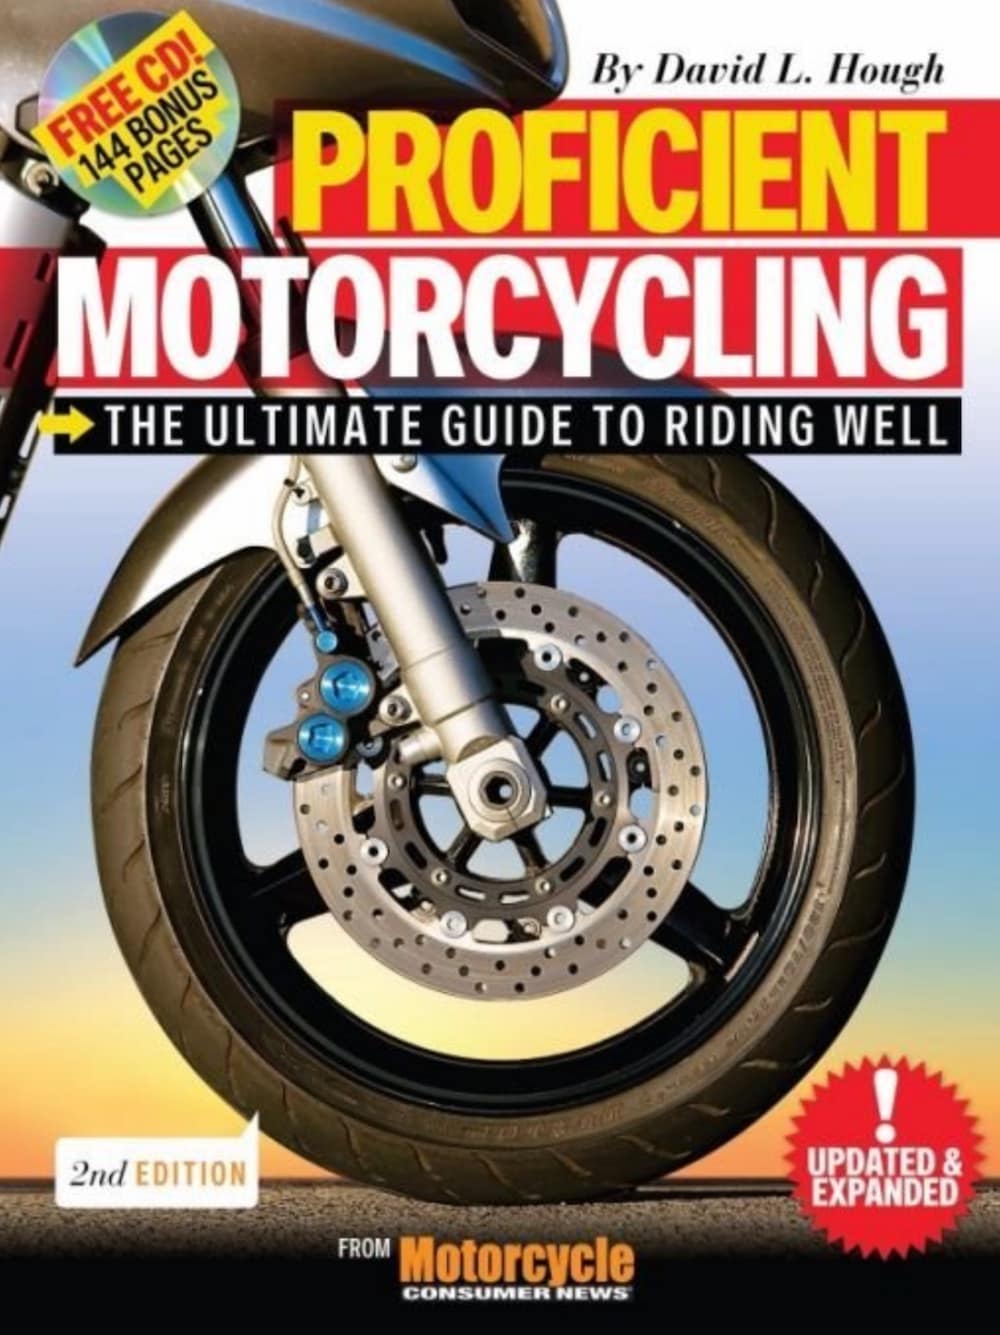 Proficient motorcycling - motorcycling book